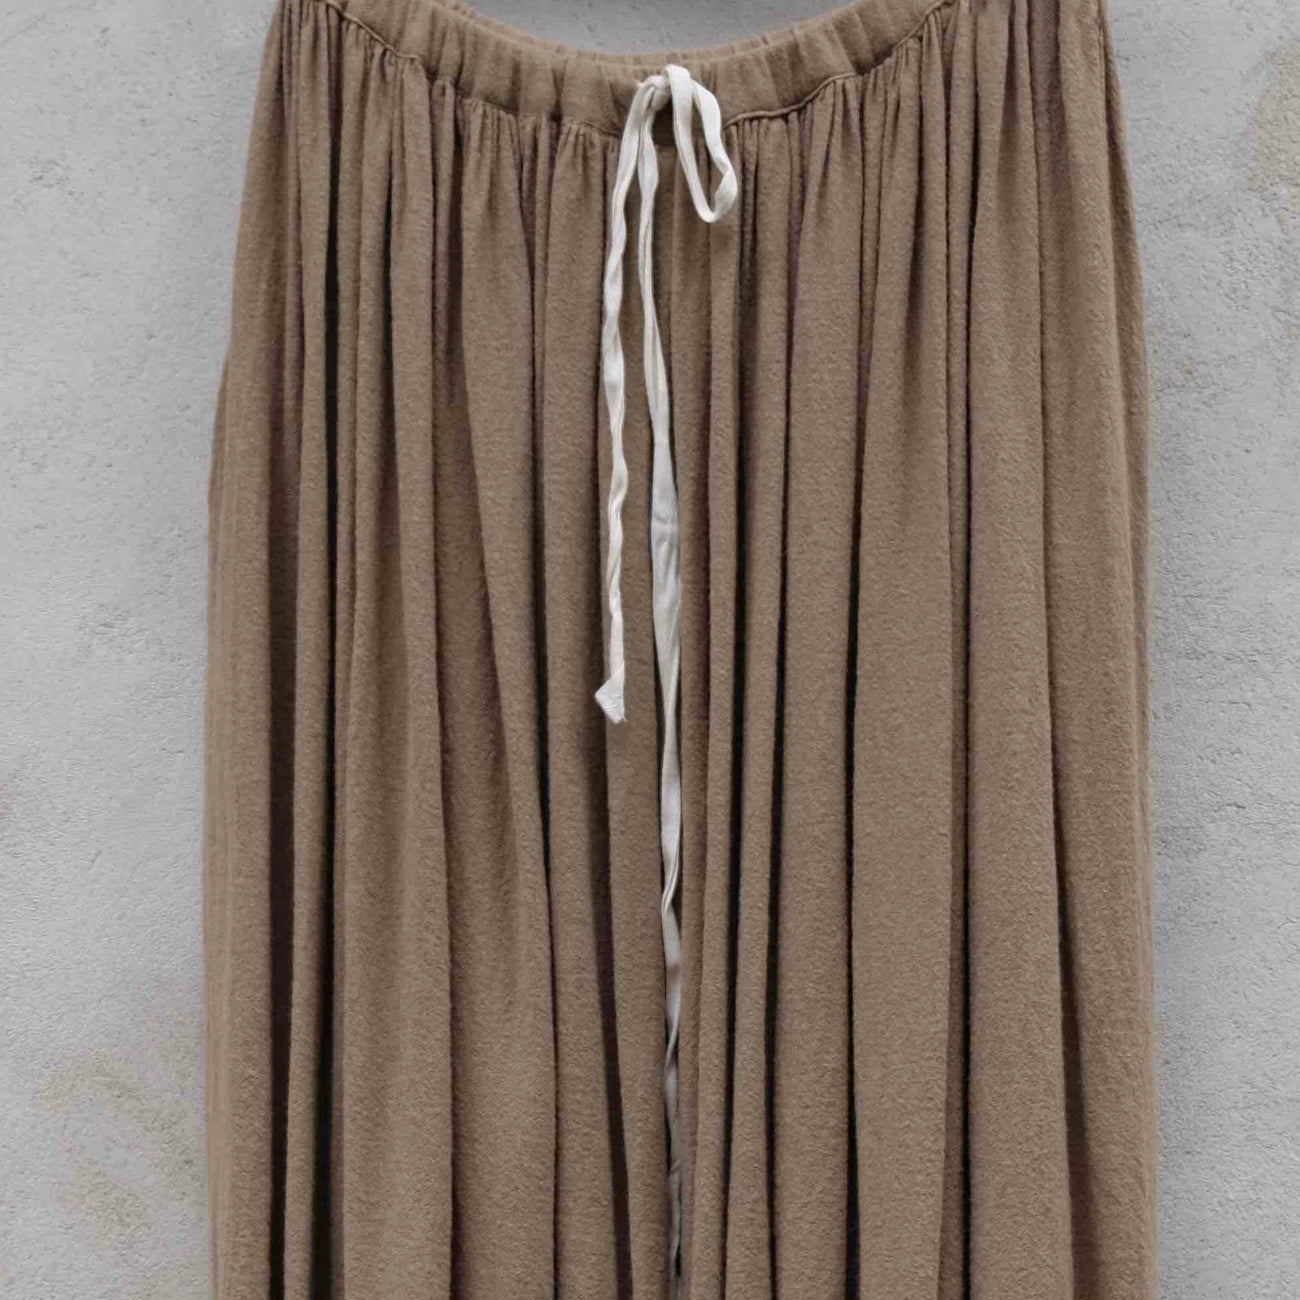 fauve skirt in sand